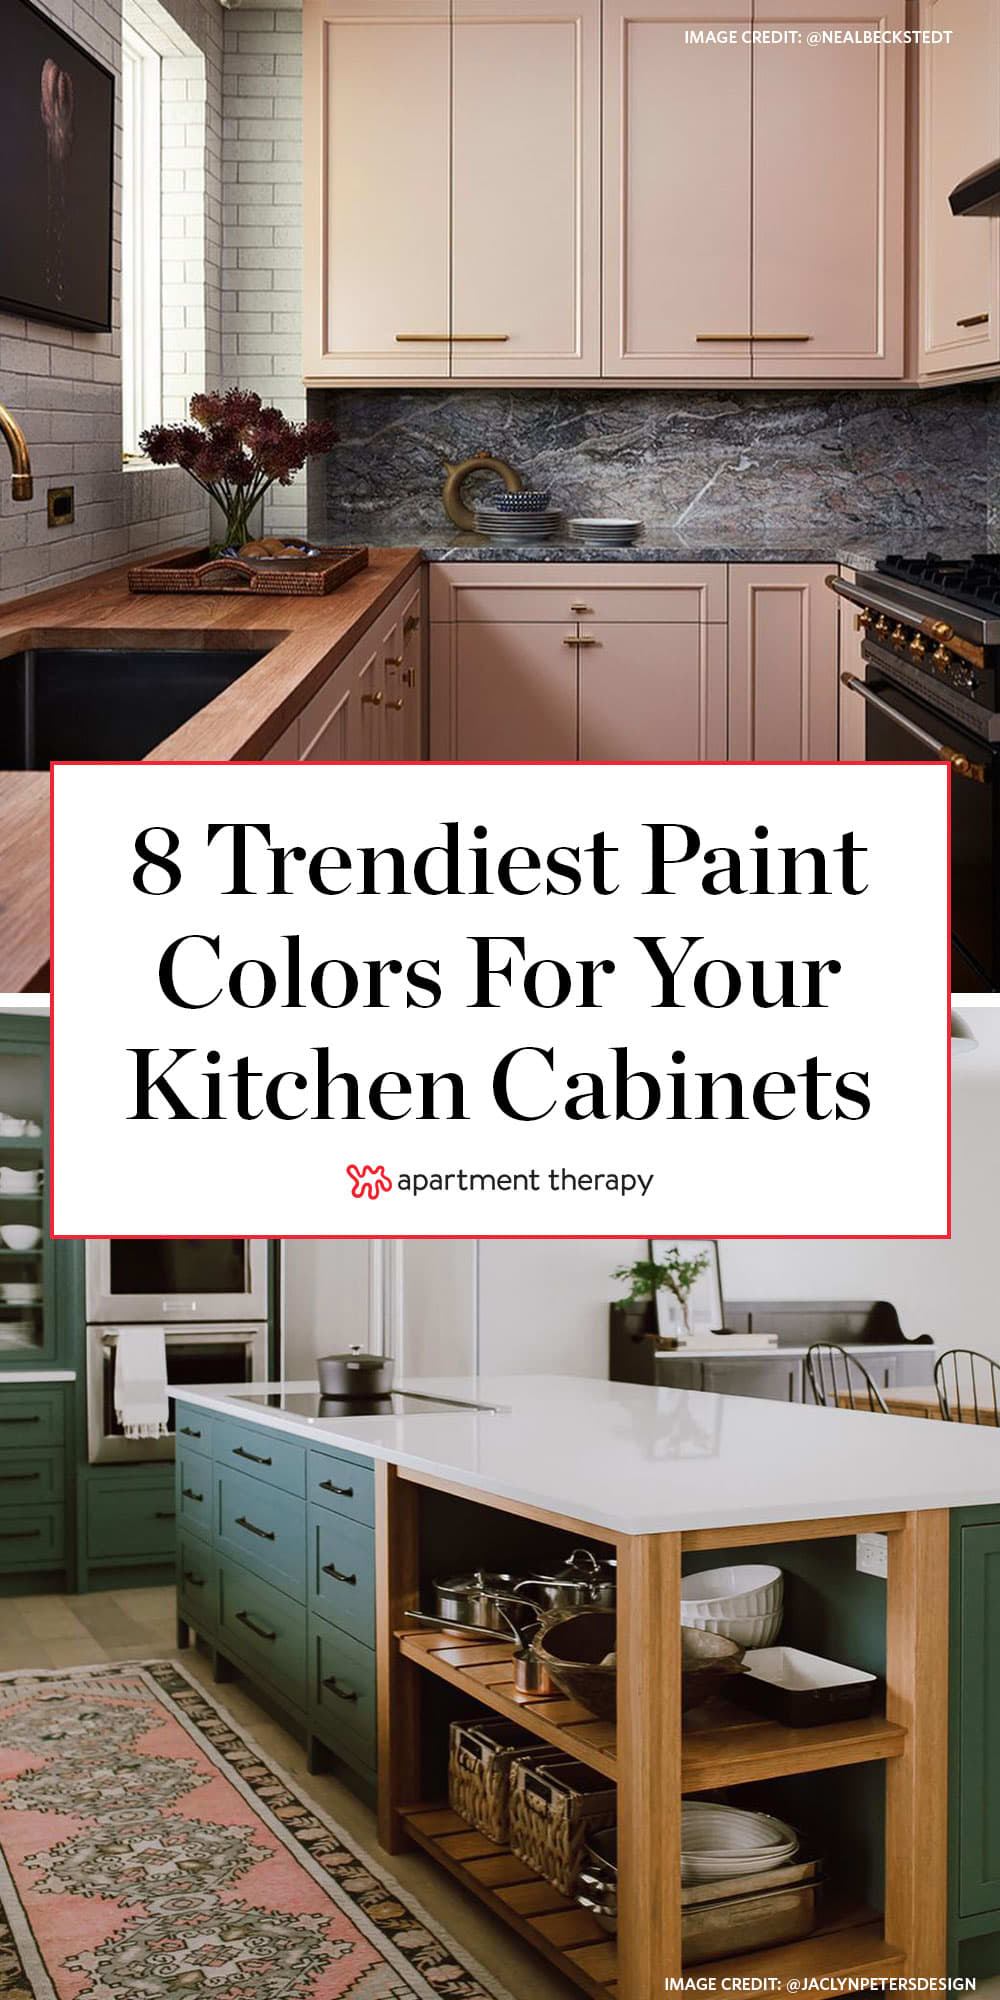 8 Lovely Kitchen Cabinet Paint Color Ideas What Shades To Paint